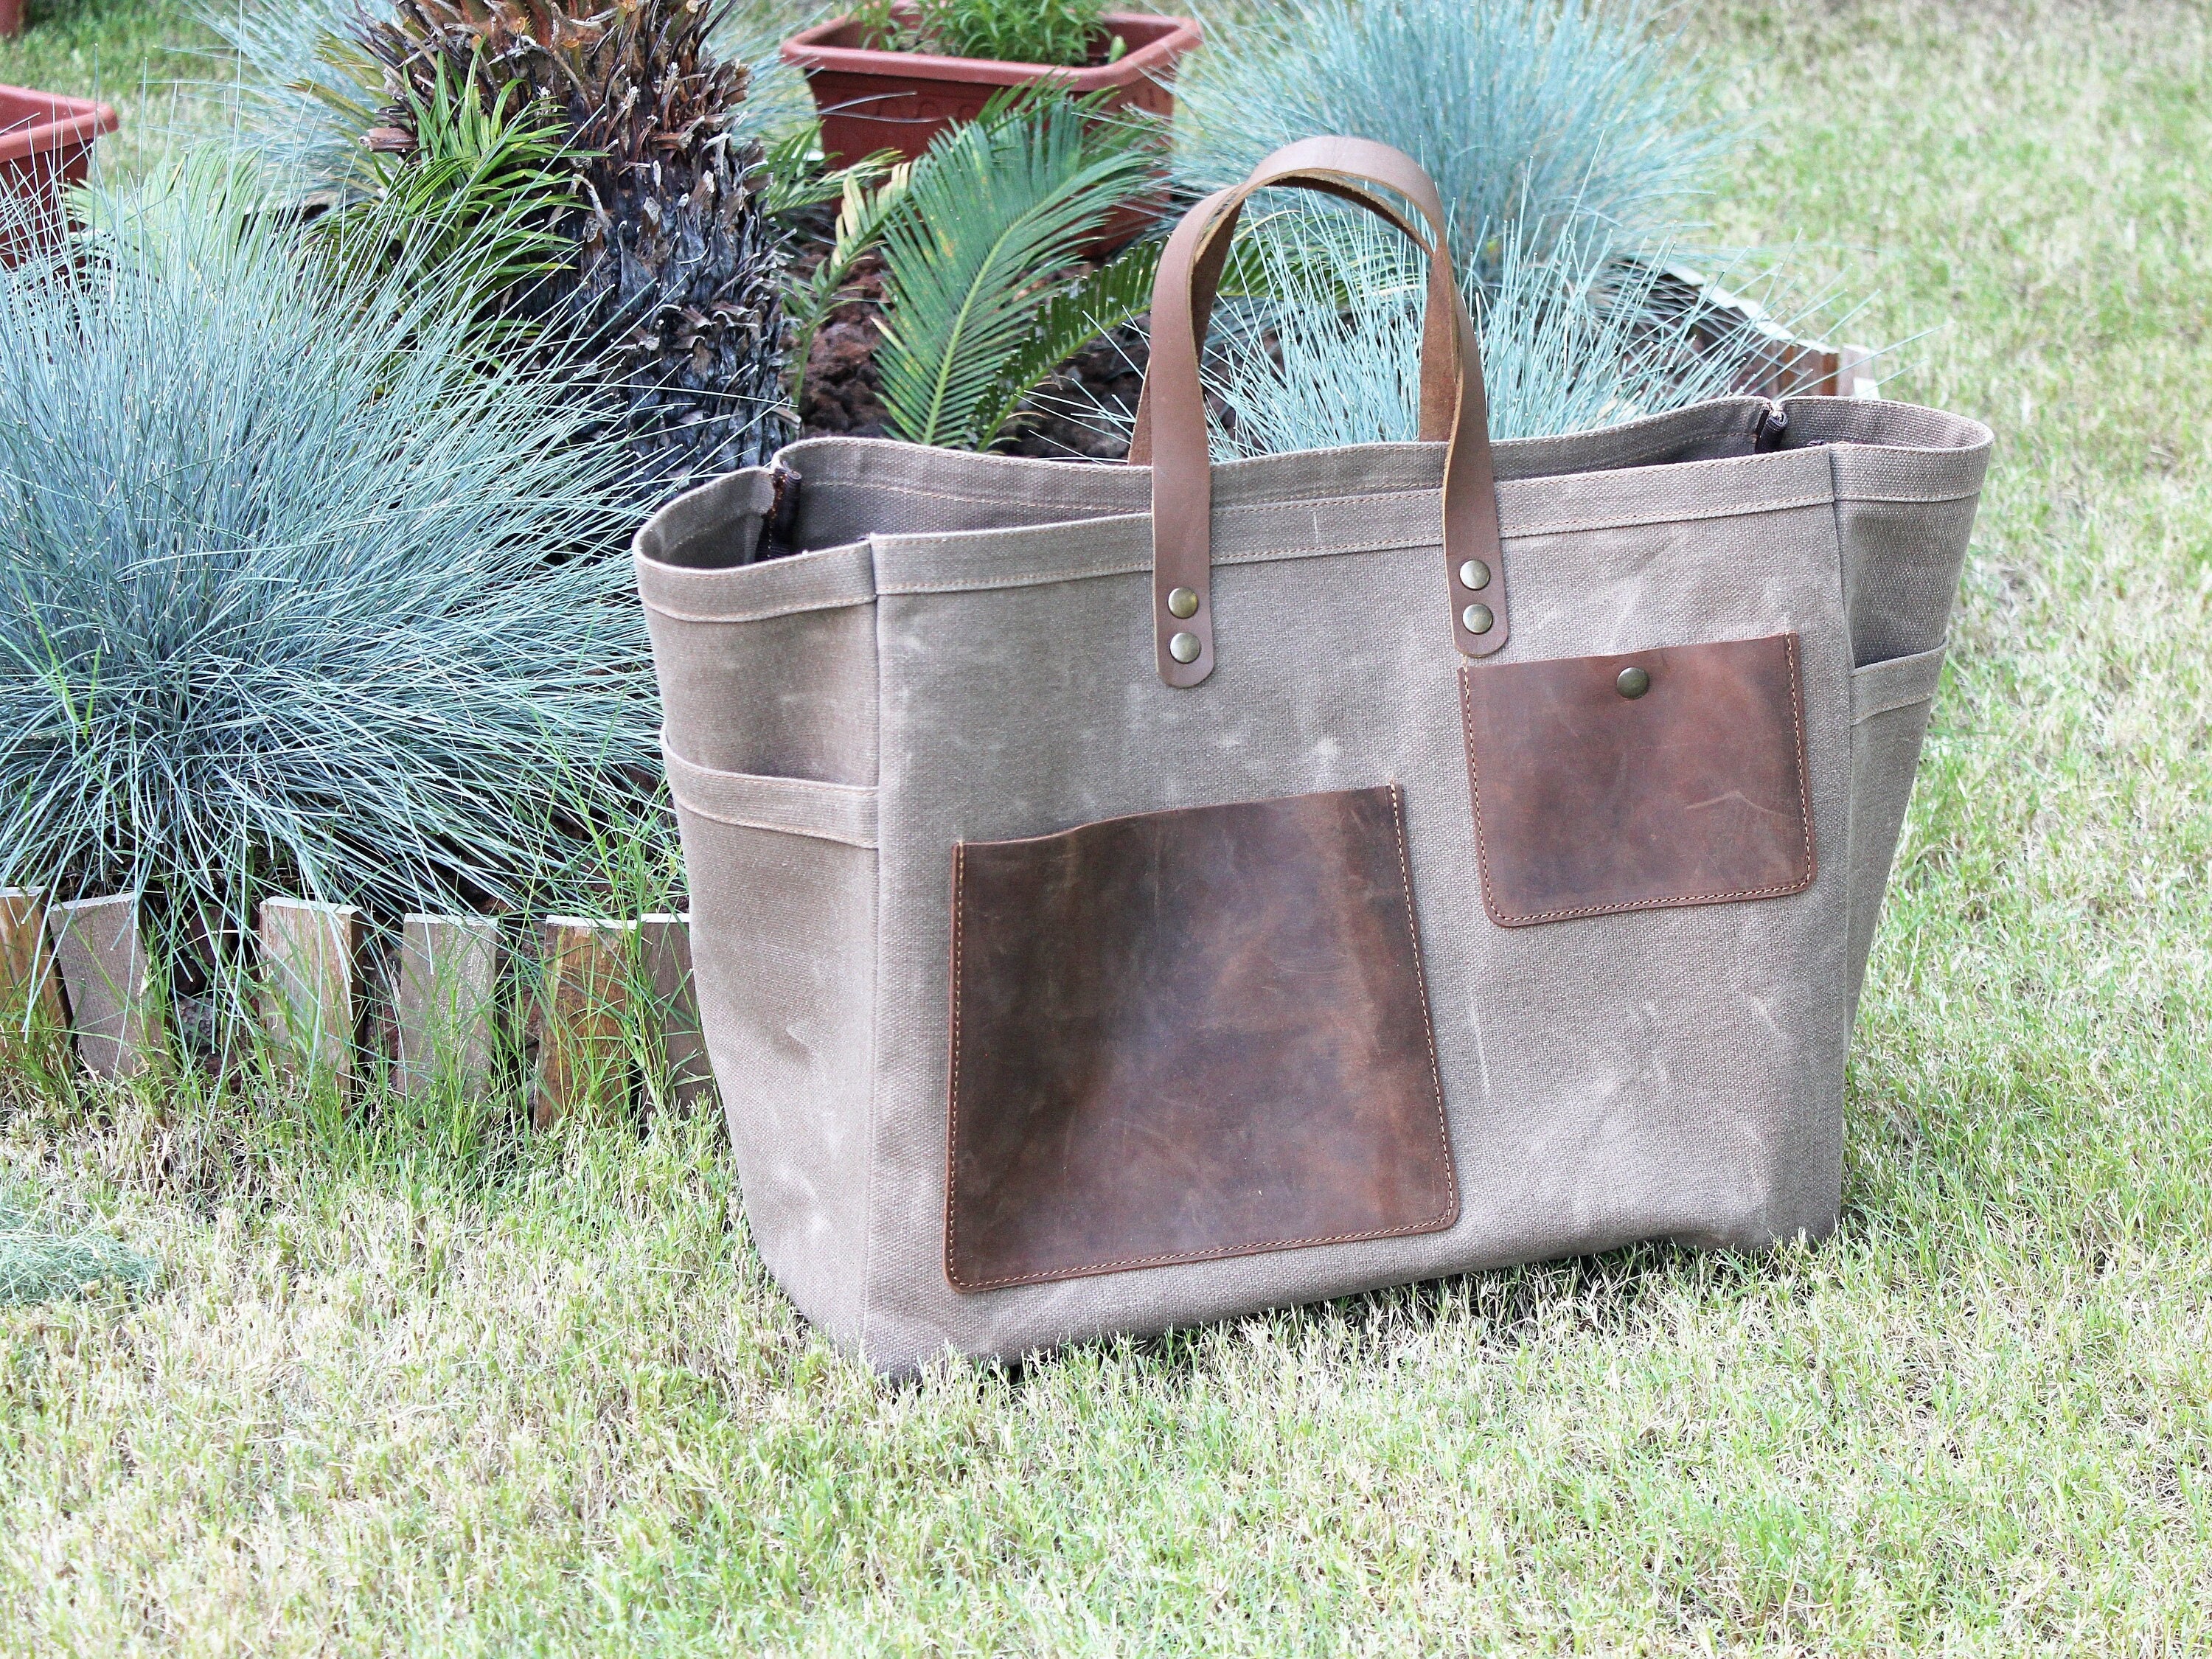 BURPEE Waxed_Canvas_Garden_Tool_Tote Waxed Canvas Heavy-Duty Tote Bag  Storage Organizer for Gardening Tools 12 H x 14.5 W